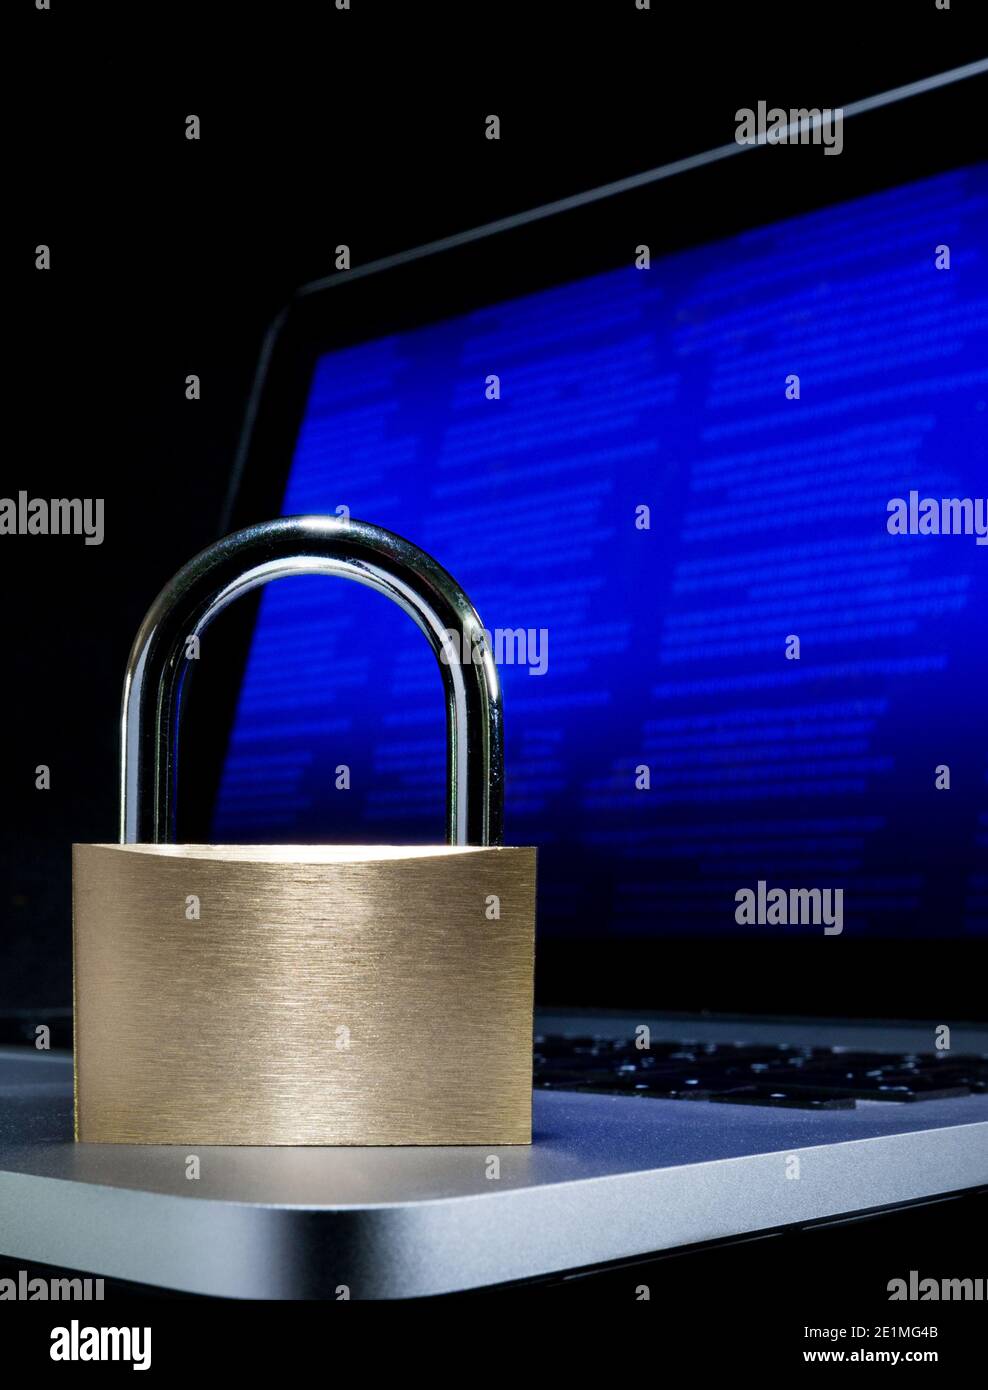 A padlock and computer, online security concept image. Stock Photo